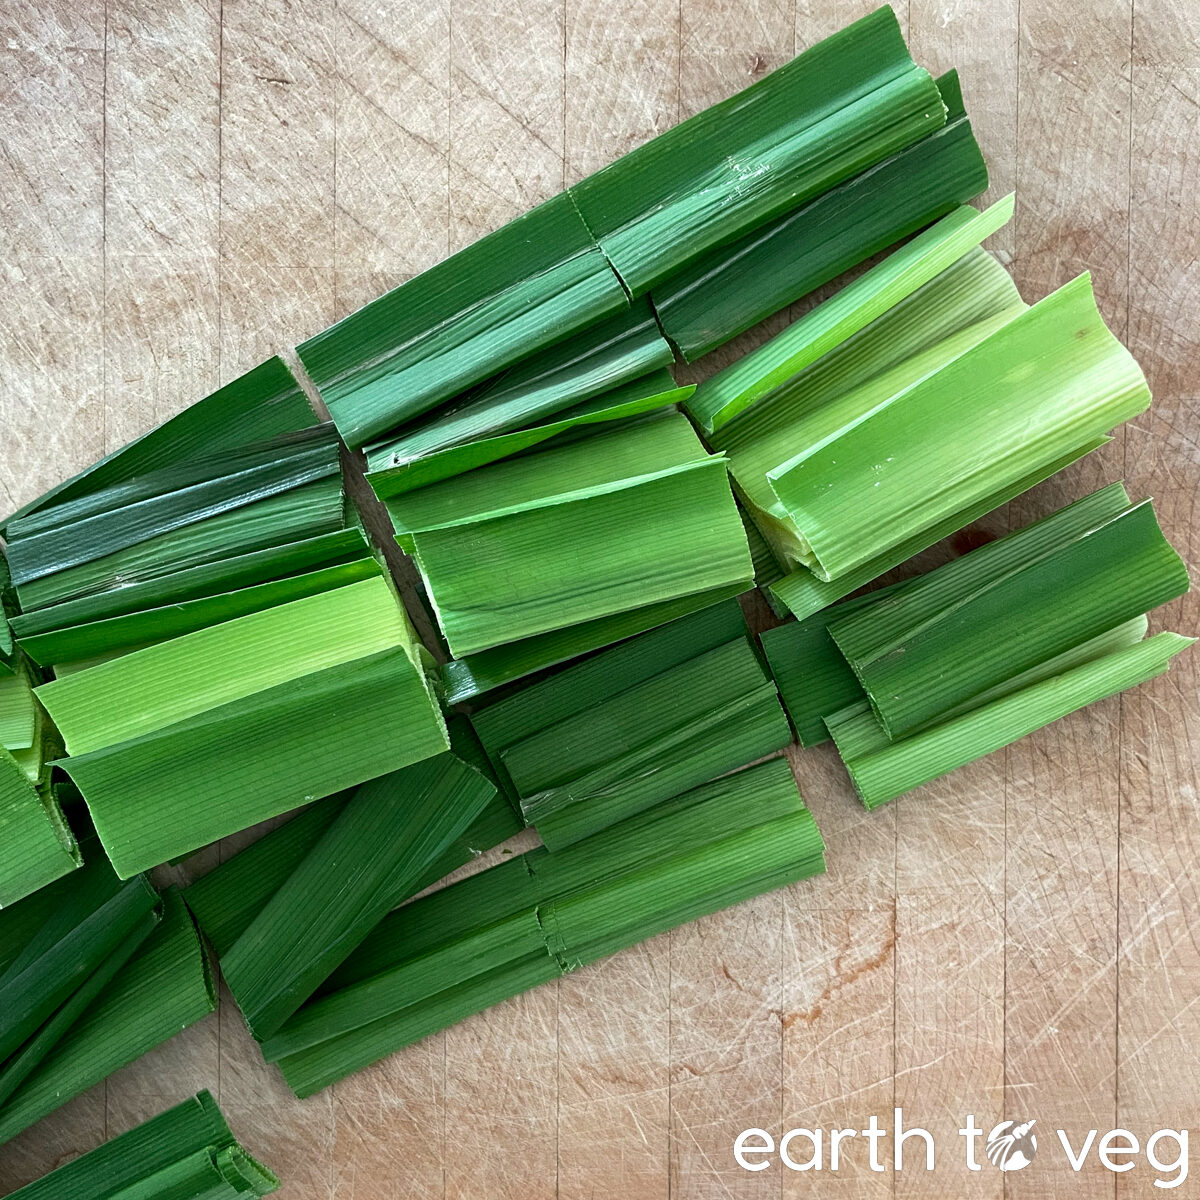 Chopped pandan leaves rest on a wooden cutting board.